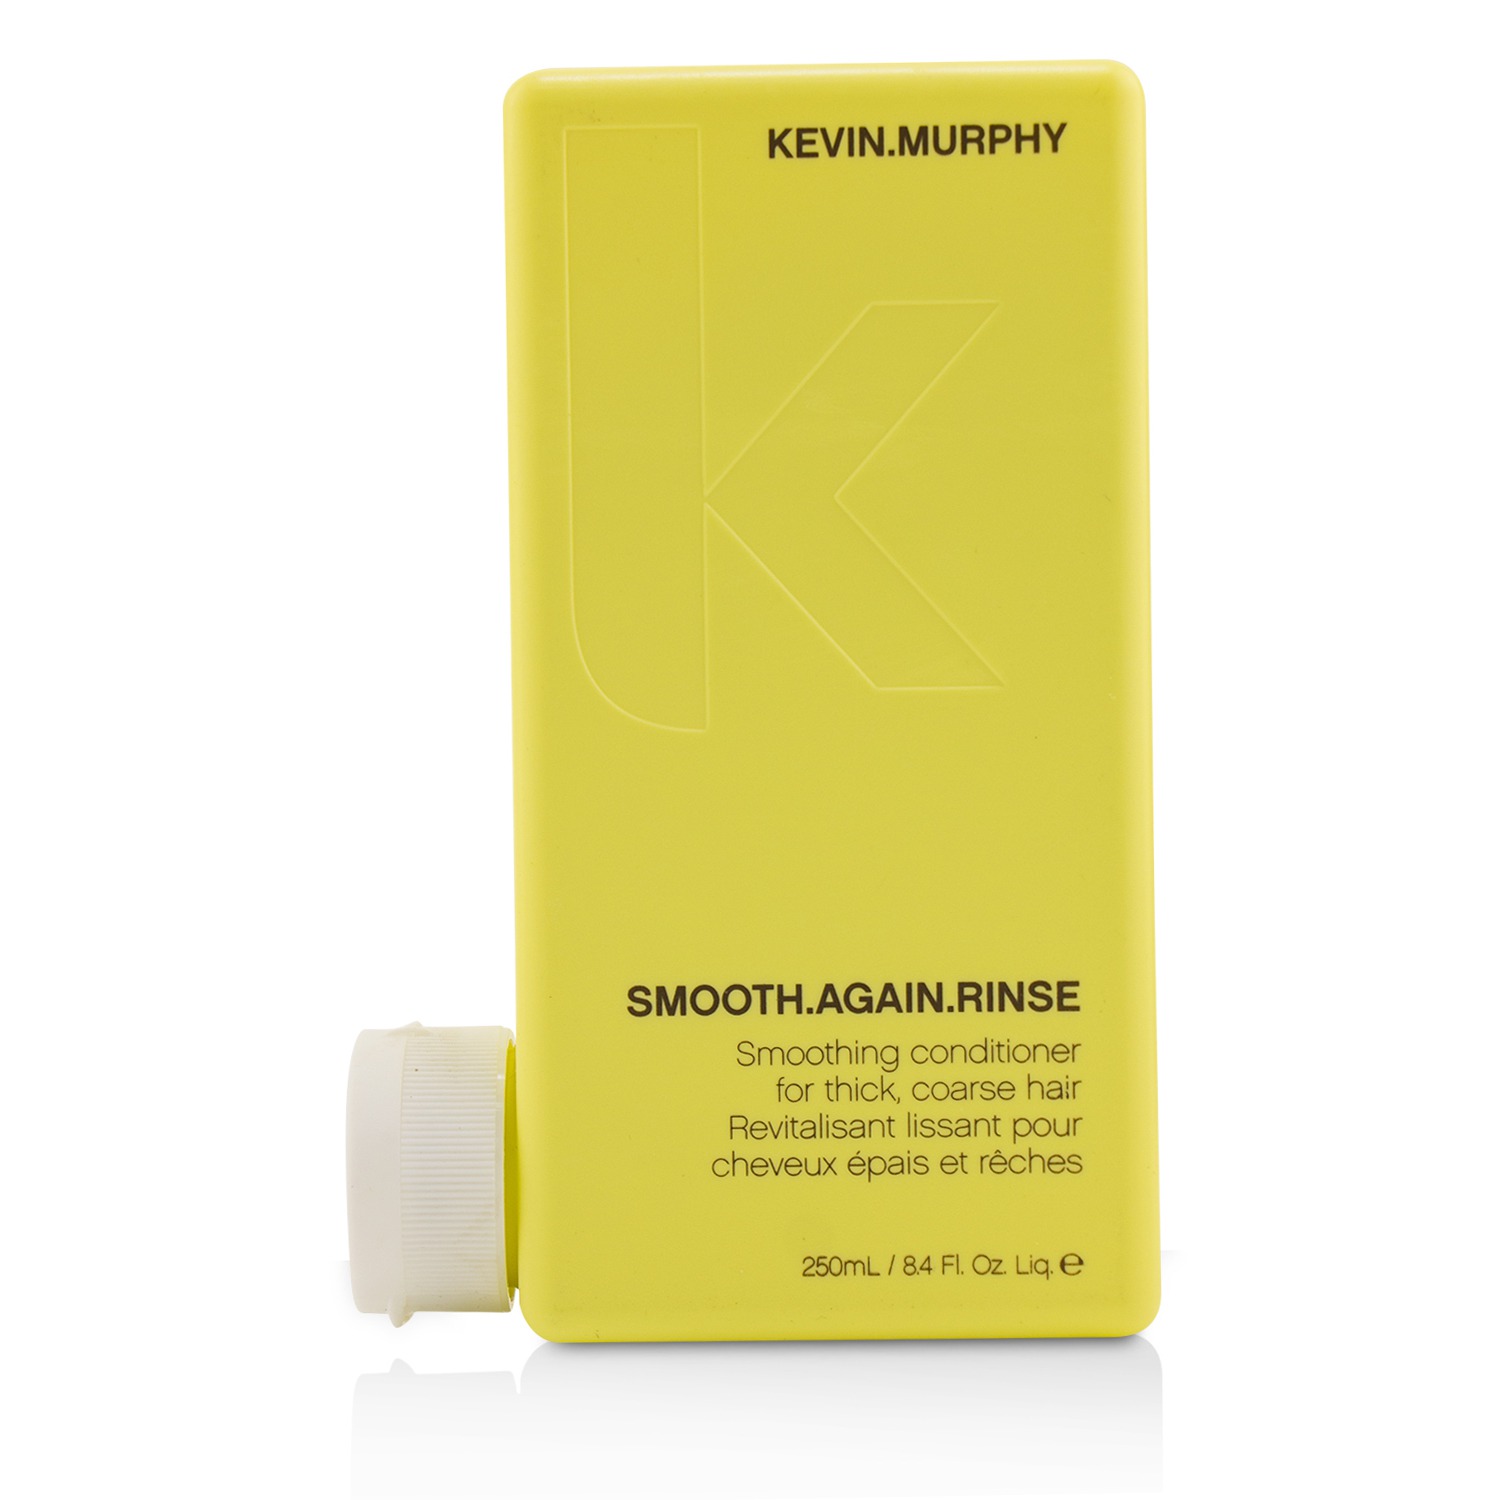 Smooth.Again.Rinse (Smoothing Conditioner - For Thick Coarse Hair) Kevin.Murphy Image